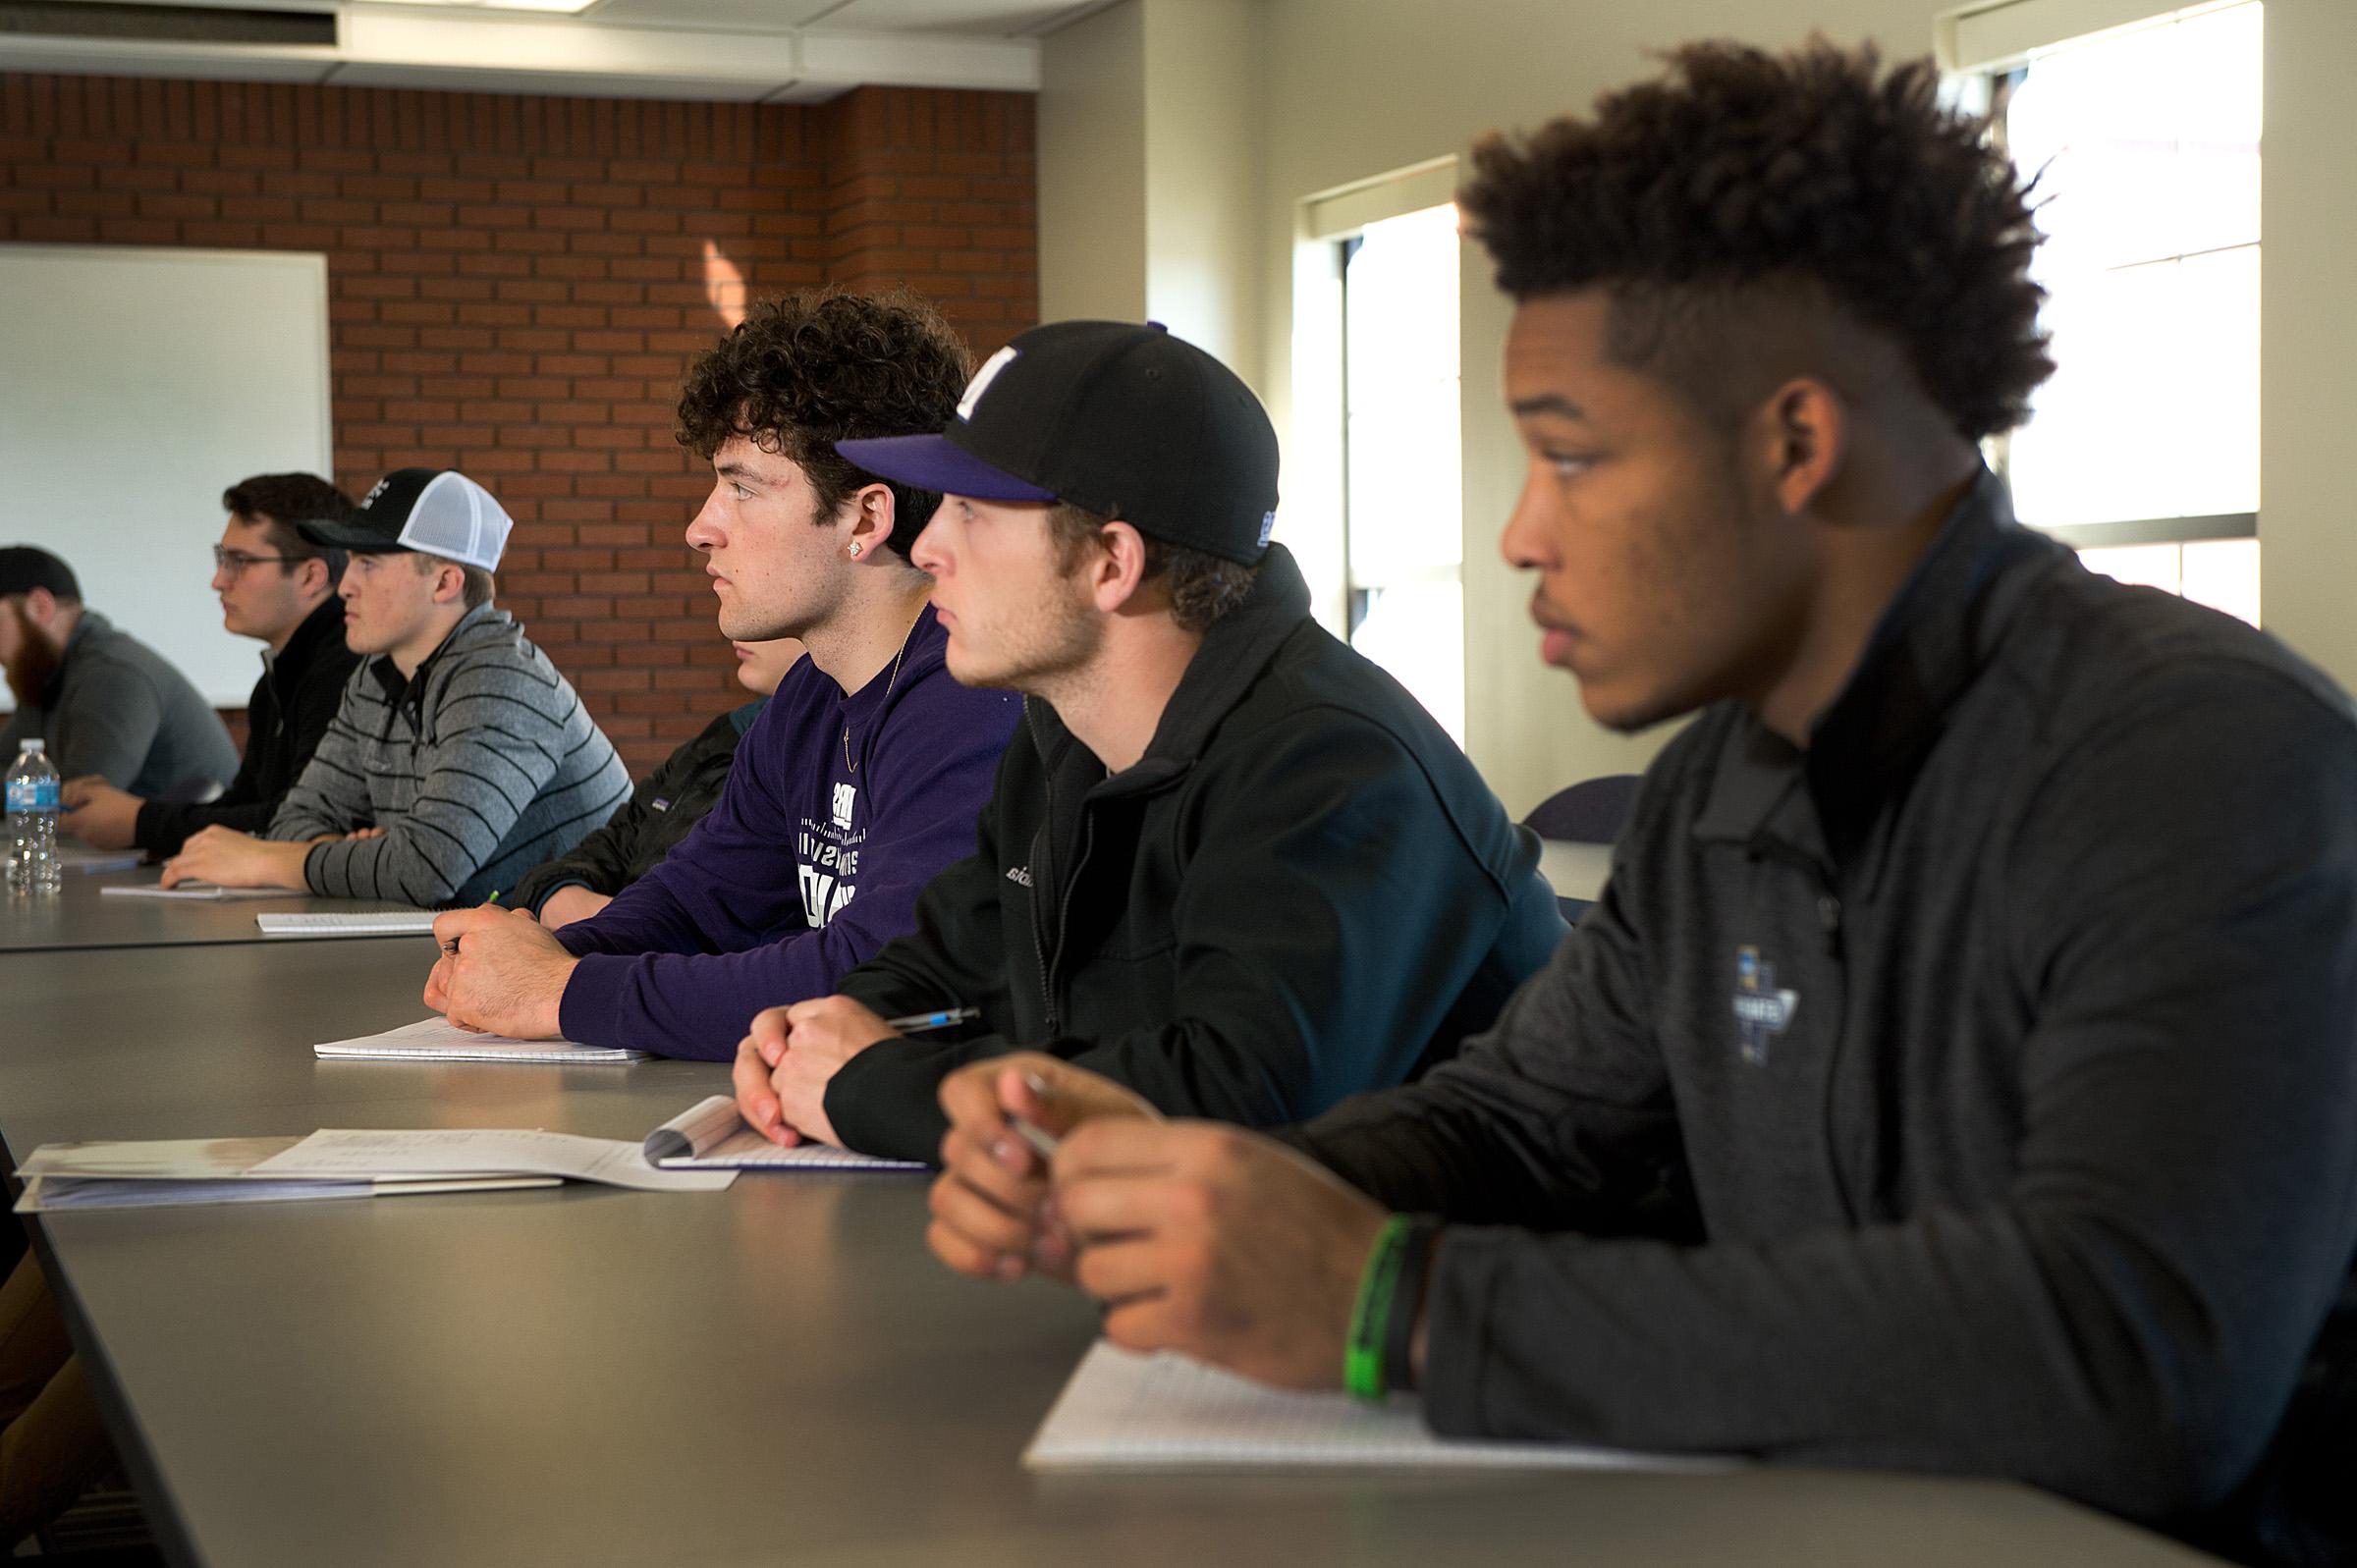 University of Mount Union students in classroom.